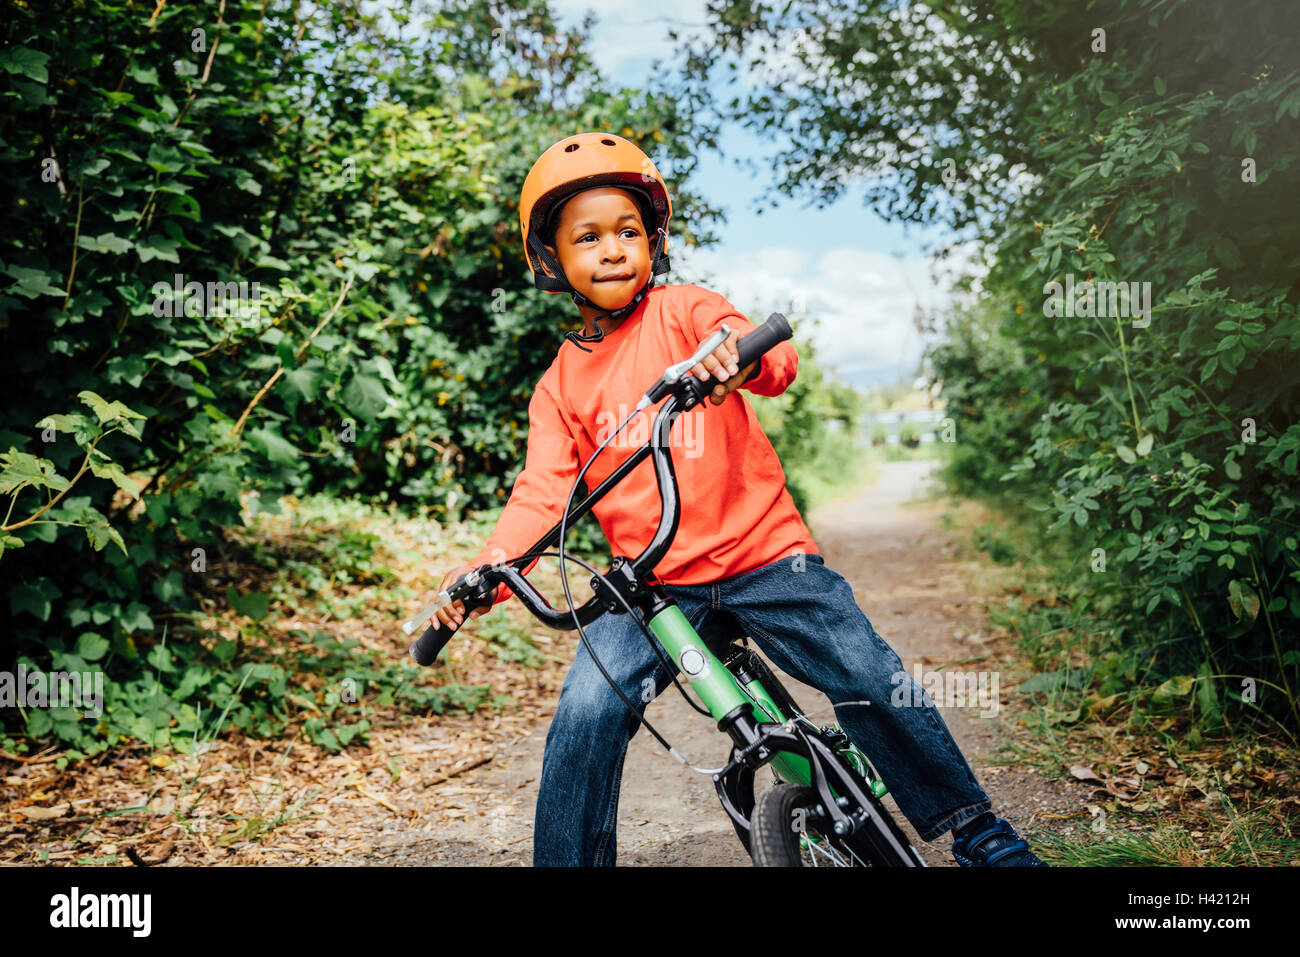 Black Boy riding bicycle with helmet Banque D'Images